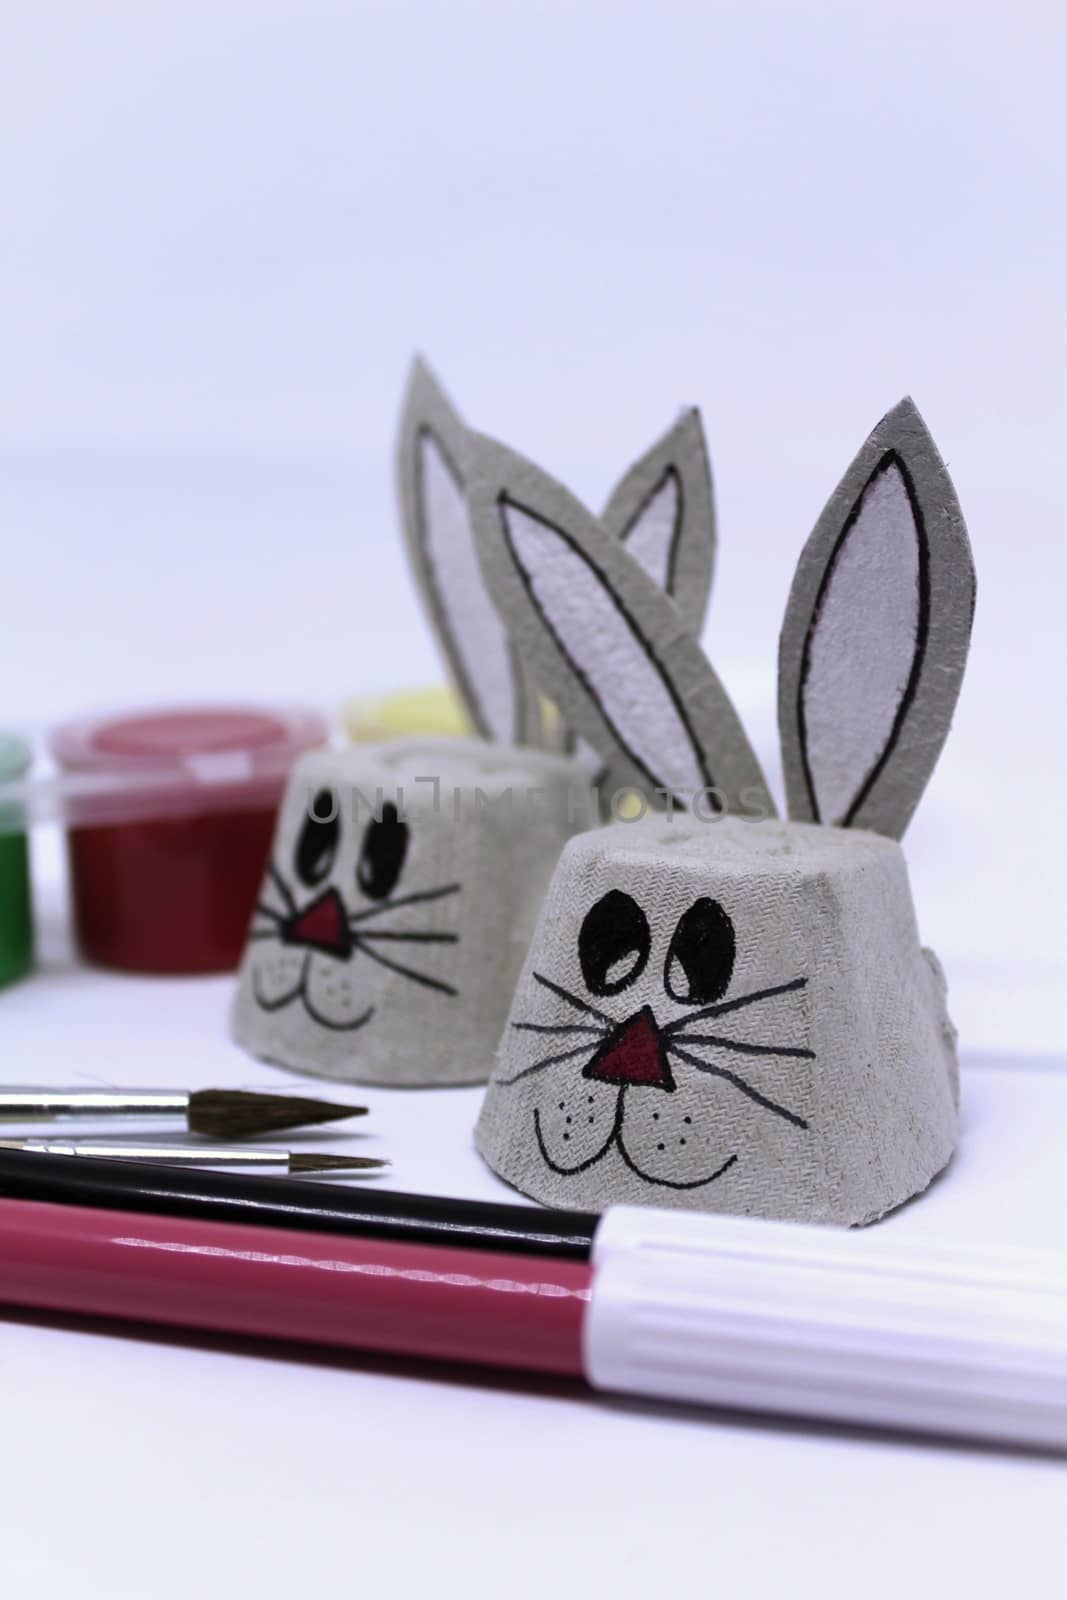 Easter bunnies made of cardboard egg cups by soniabonet